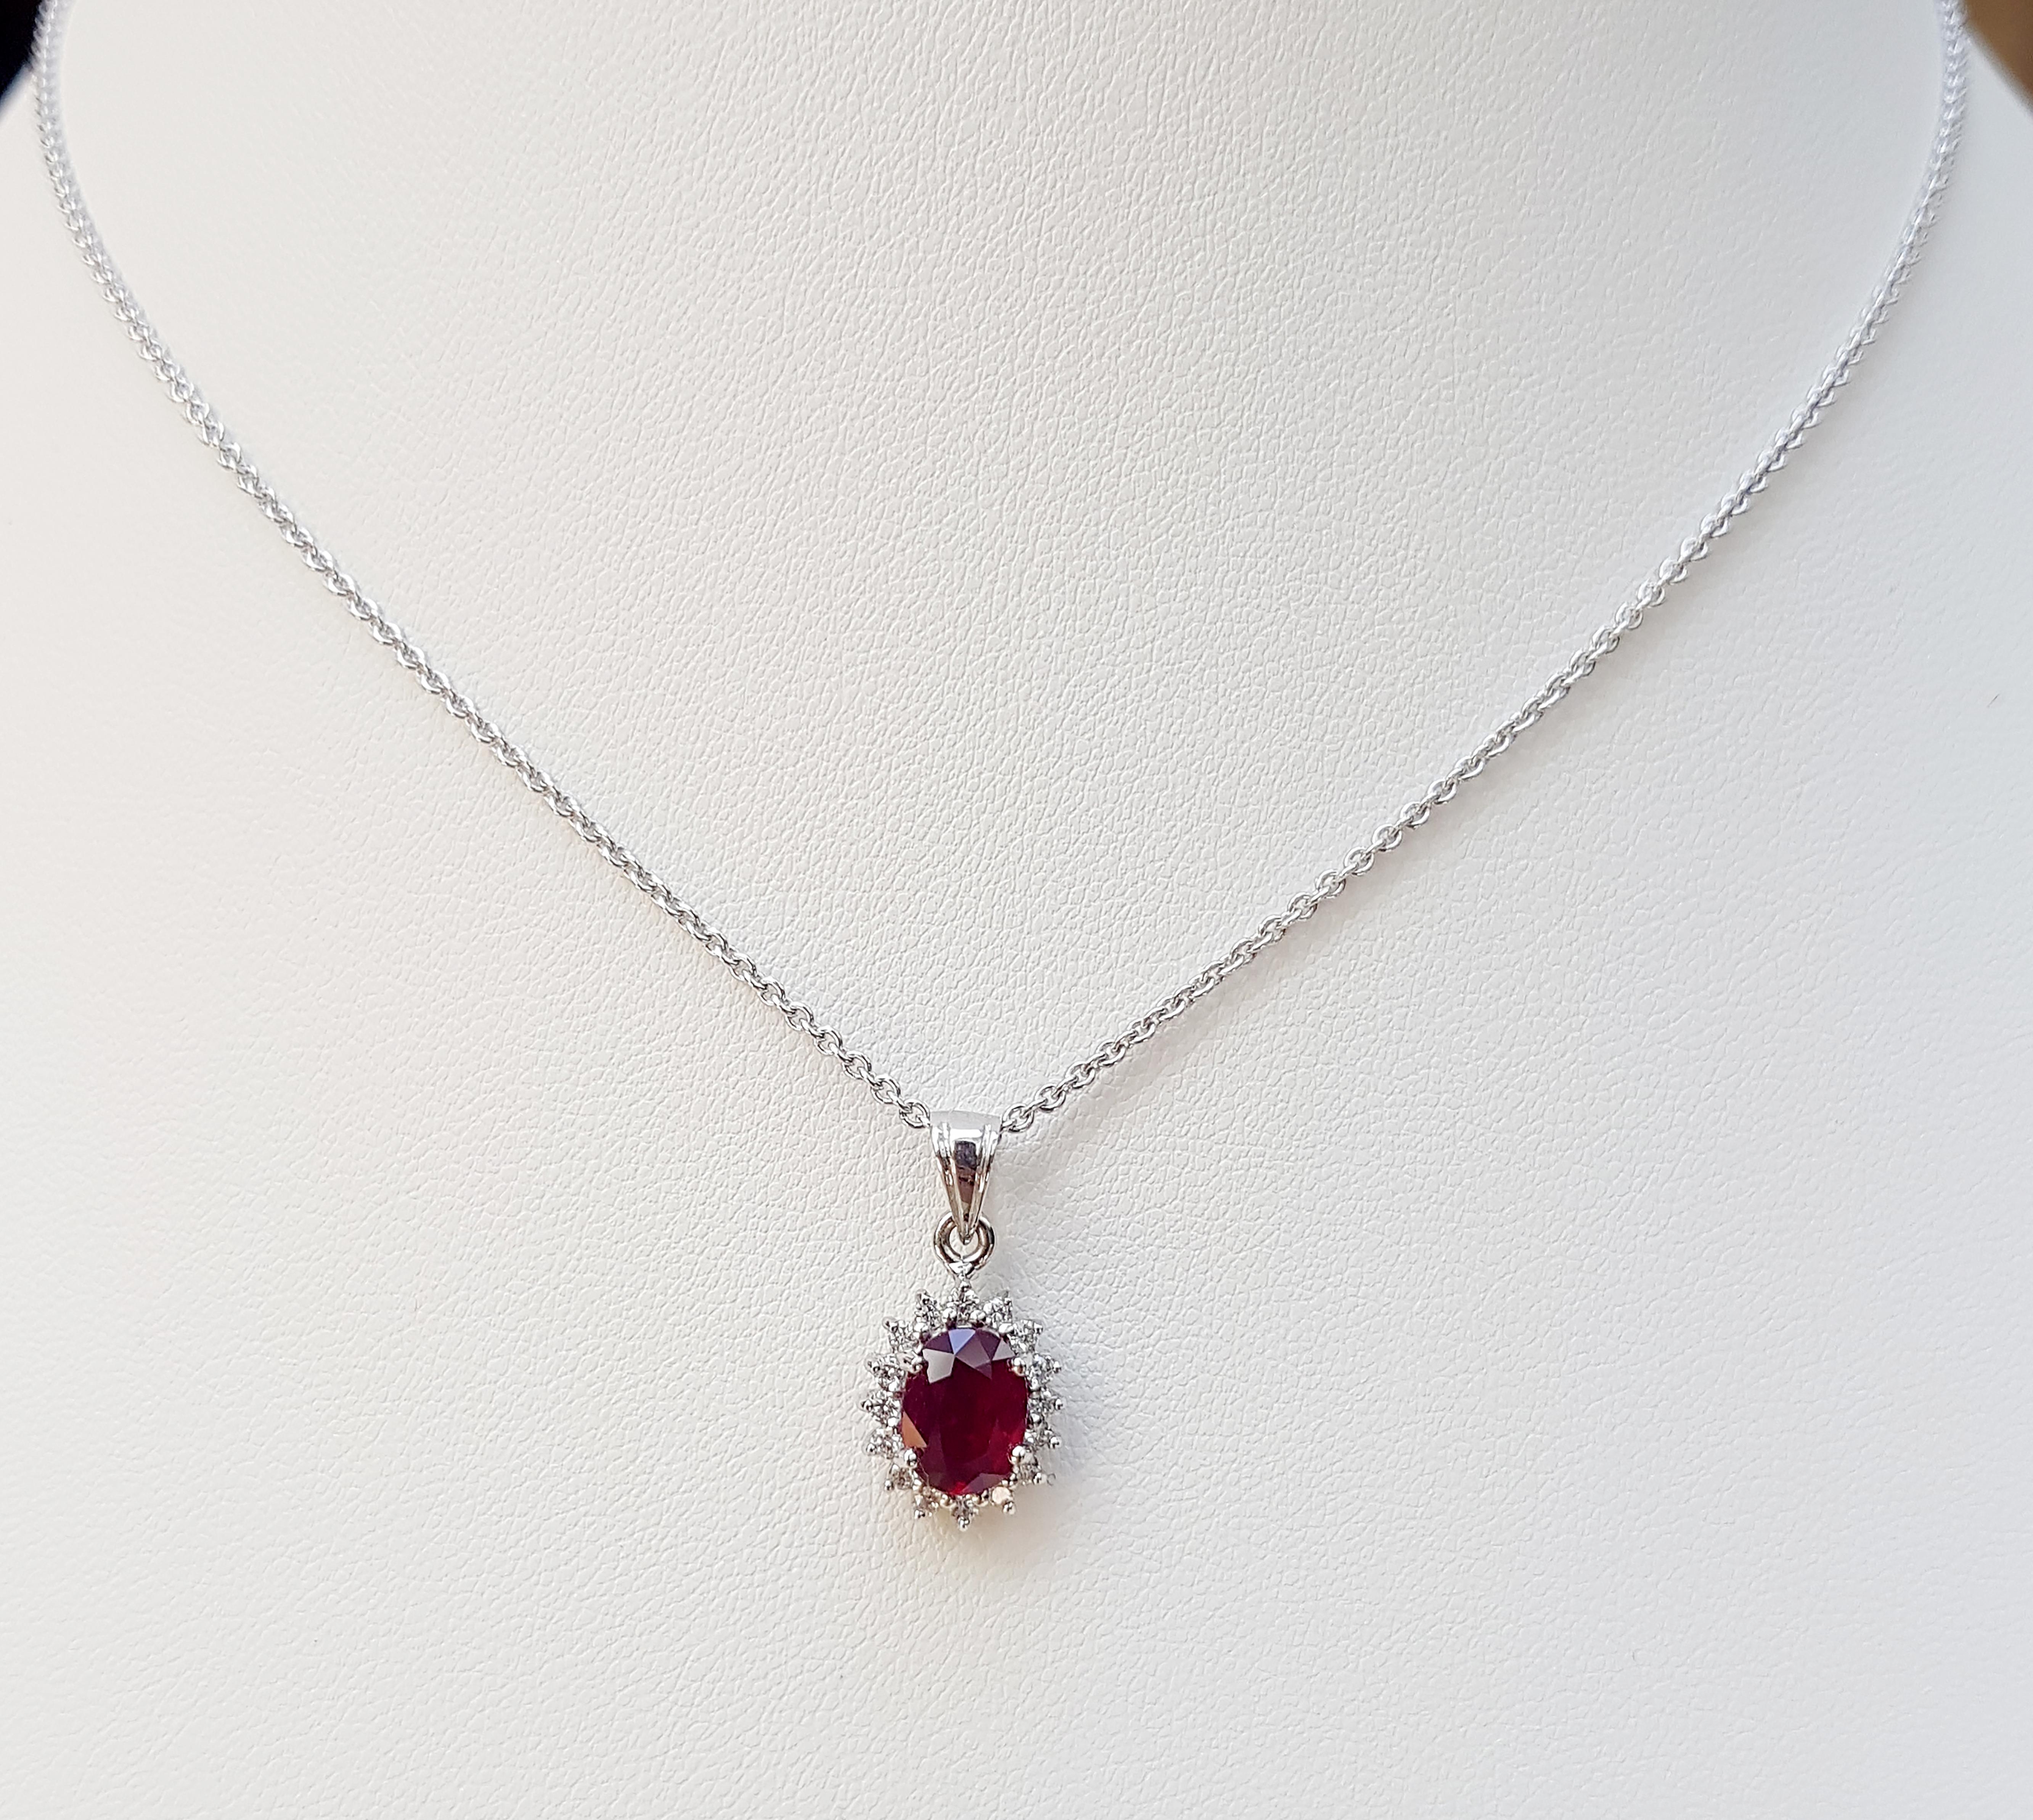 Ruby 1.80 carats with Diamond 0.12 carat Pendant set in 18 Karat White Gold Settings
(chain not included)

Width:  0.6 cm 
Length: 1.8 cm
Total Weight: 1.95 grams

